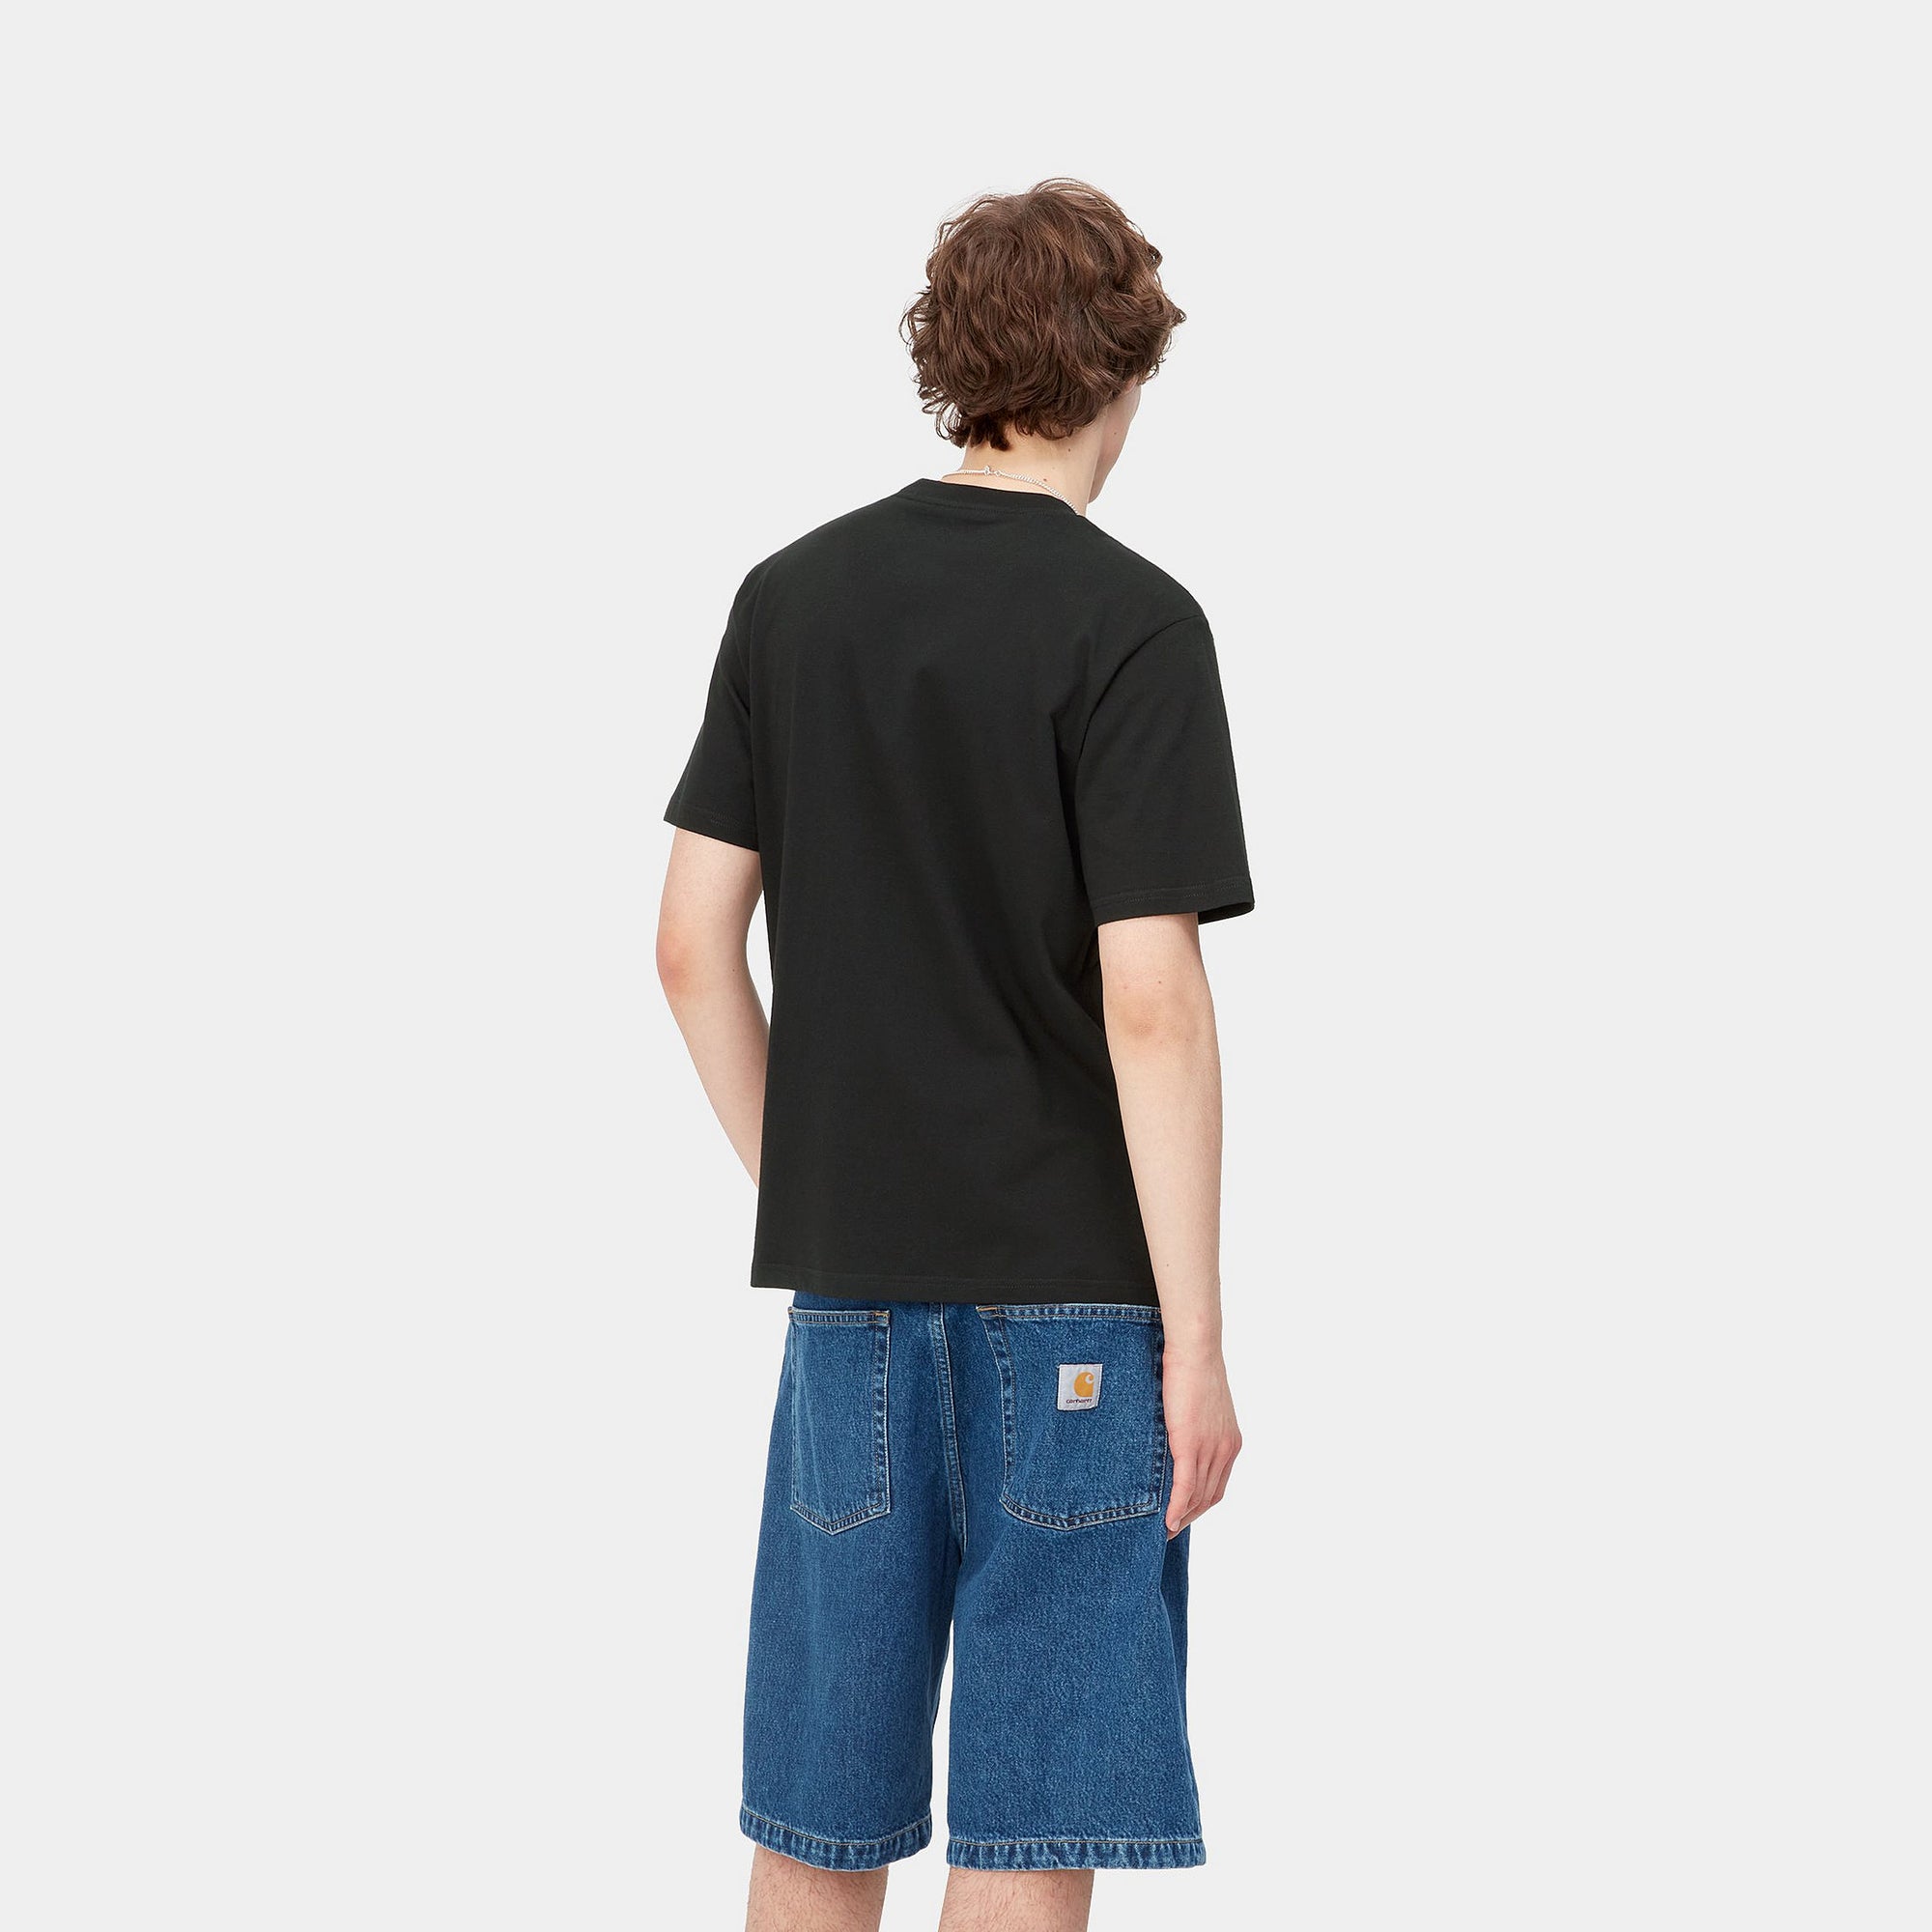 Carhartt WIP S/S Old Tunes T-Shirt (black) - Blue Mountain Store